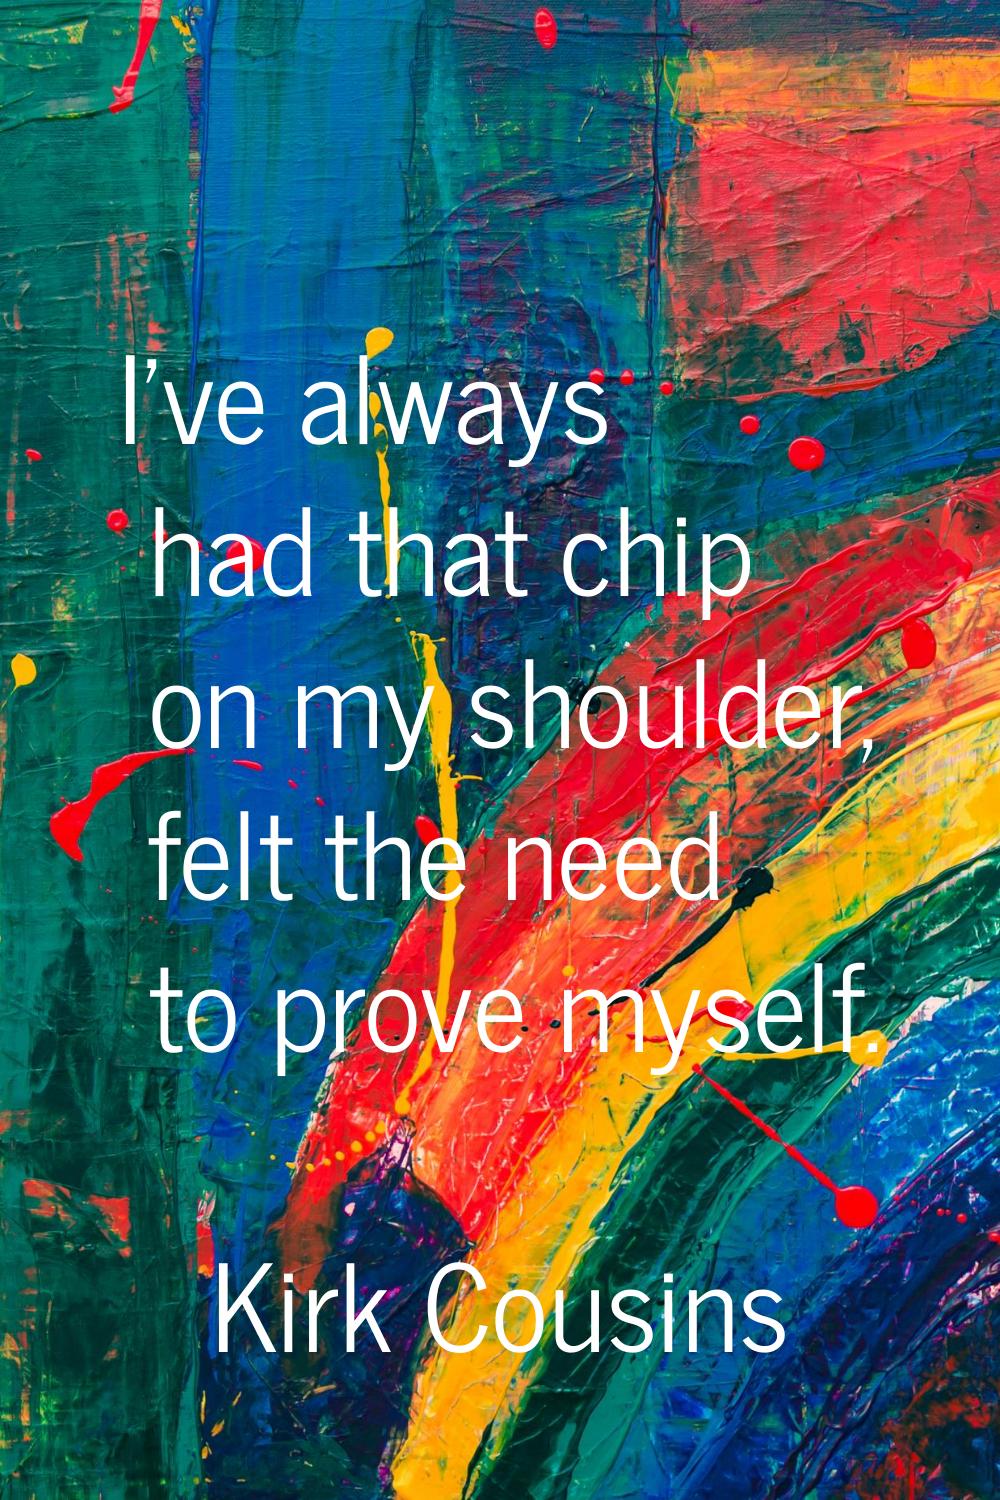 I've always had that chip on my shoulder, felt the need to prove myself.